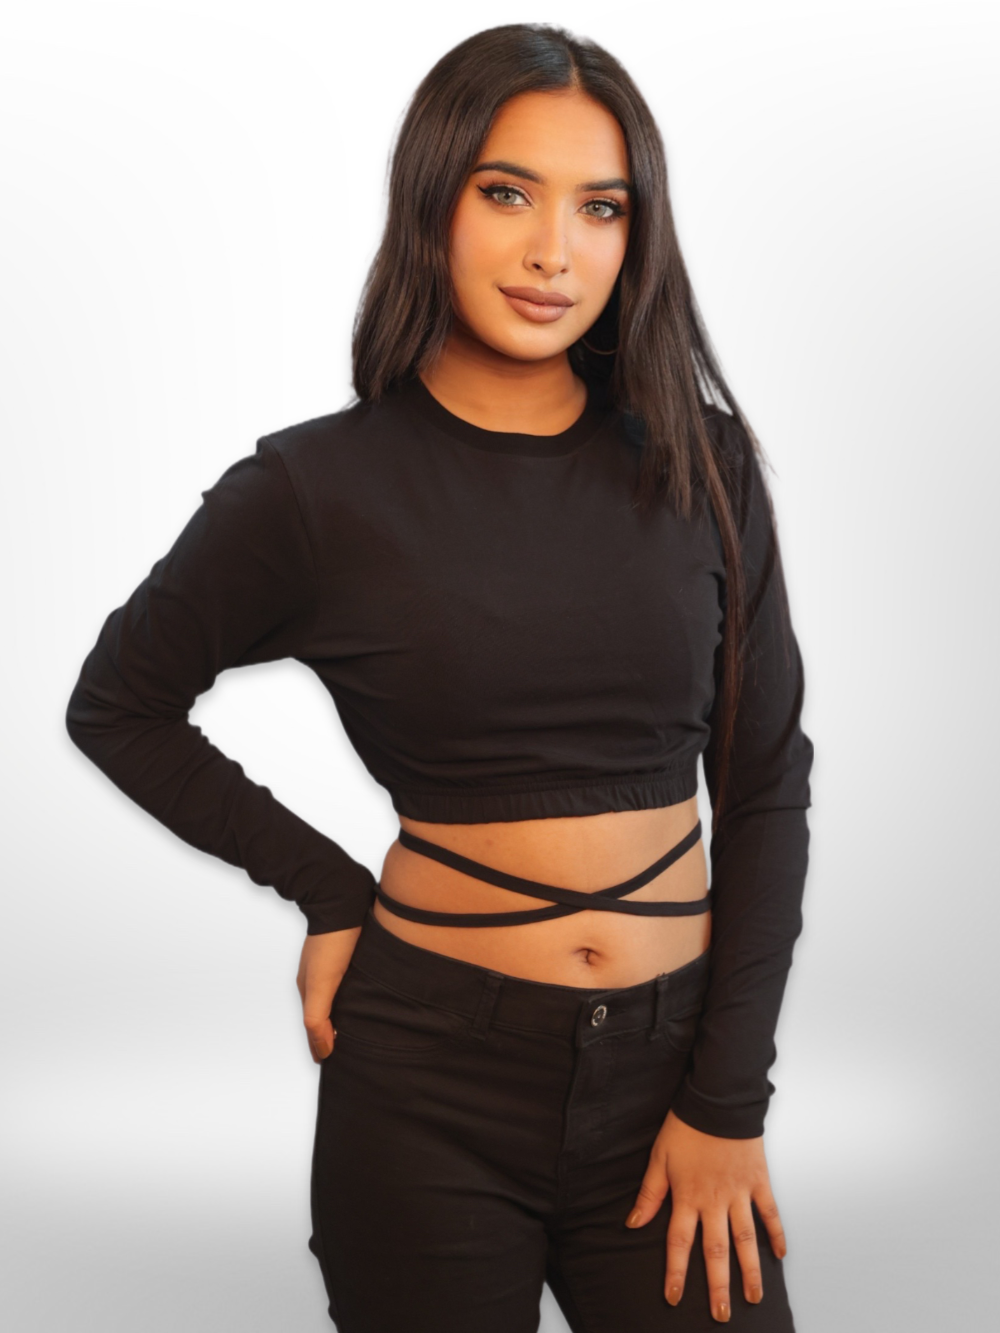 Midriff Flossing Tops Full Sleeve - Legacy Boutiques